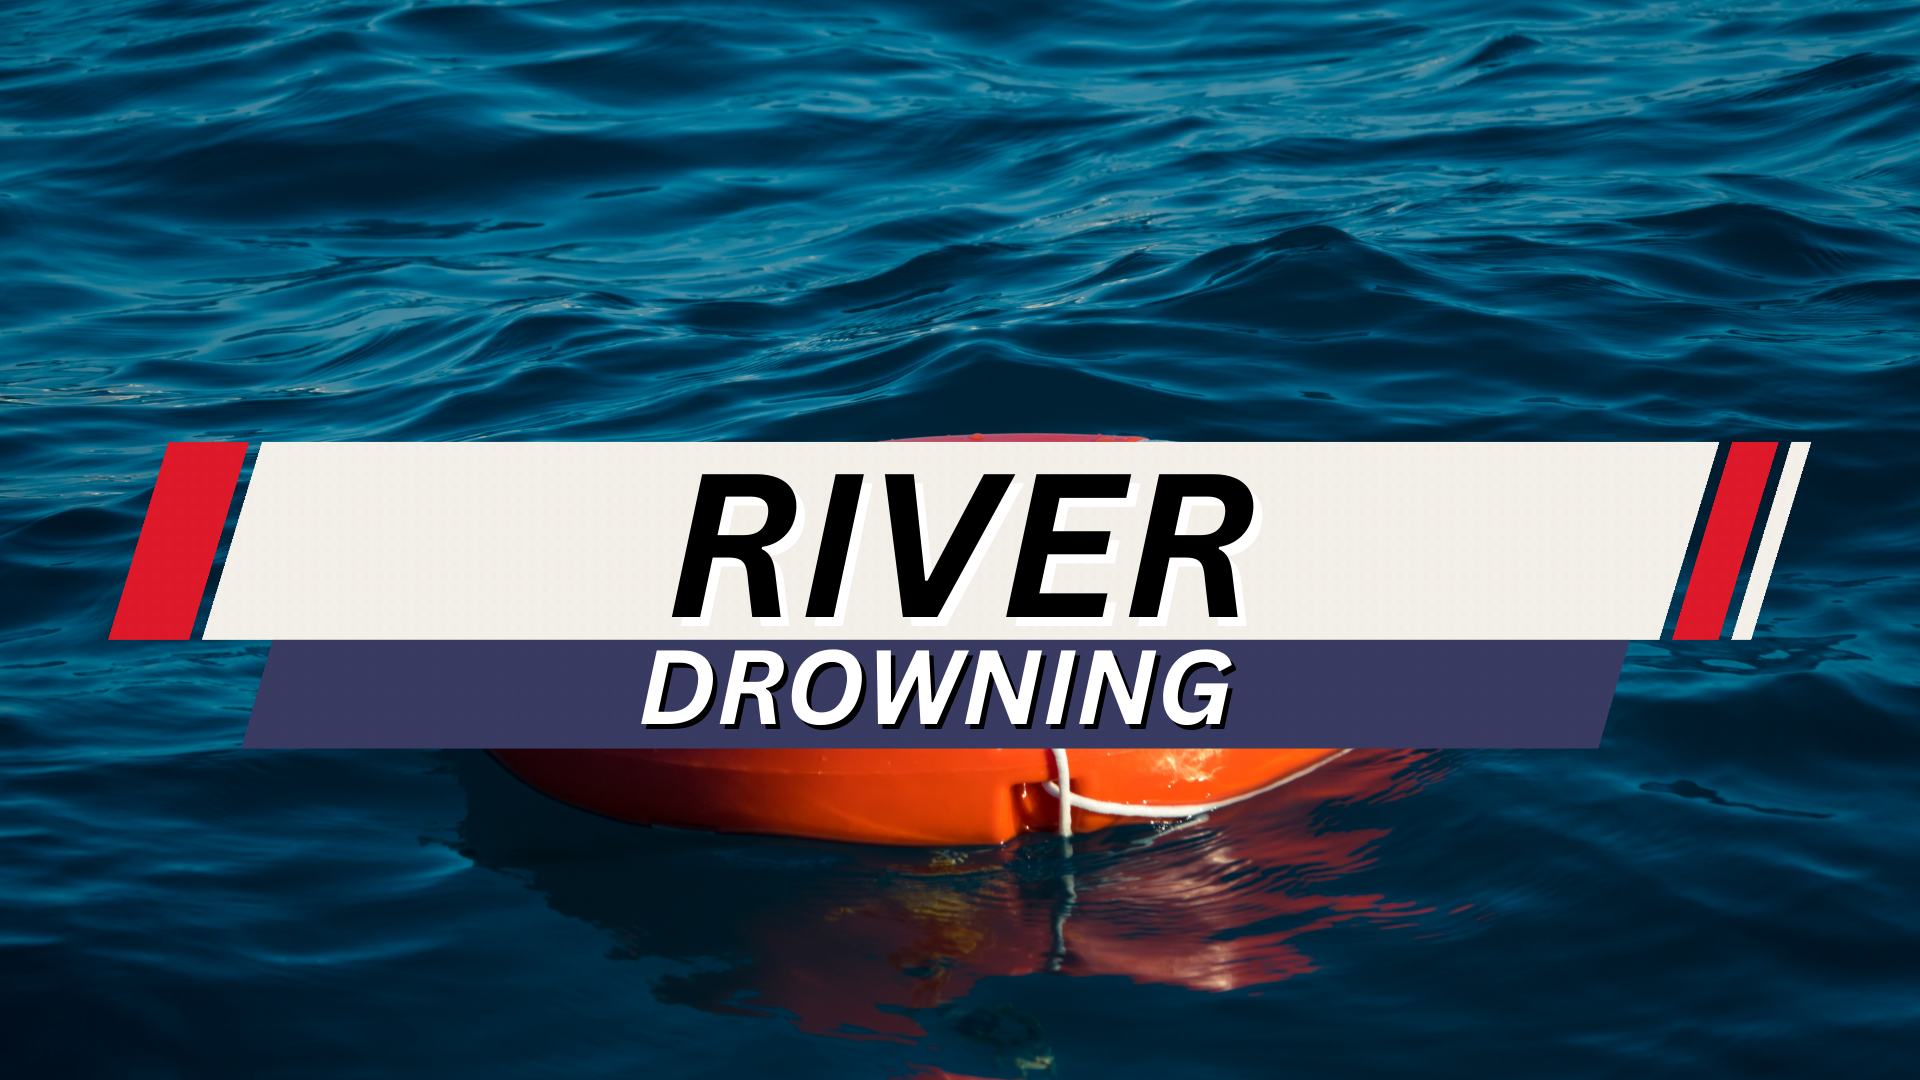 Valley Park Woman Drowns in Big River